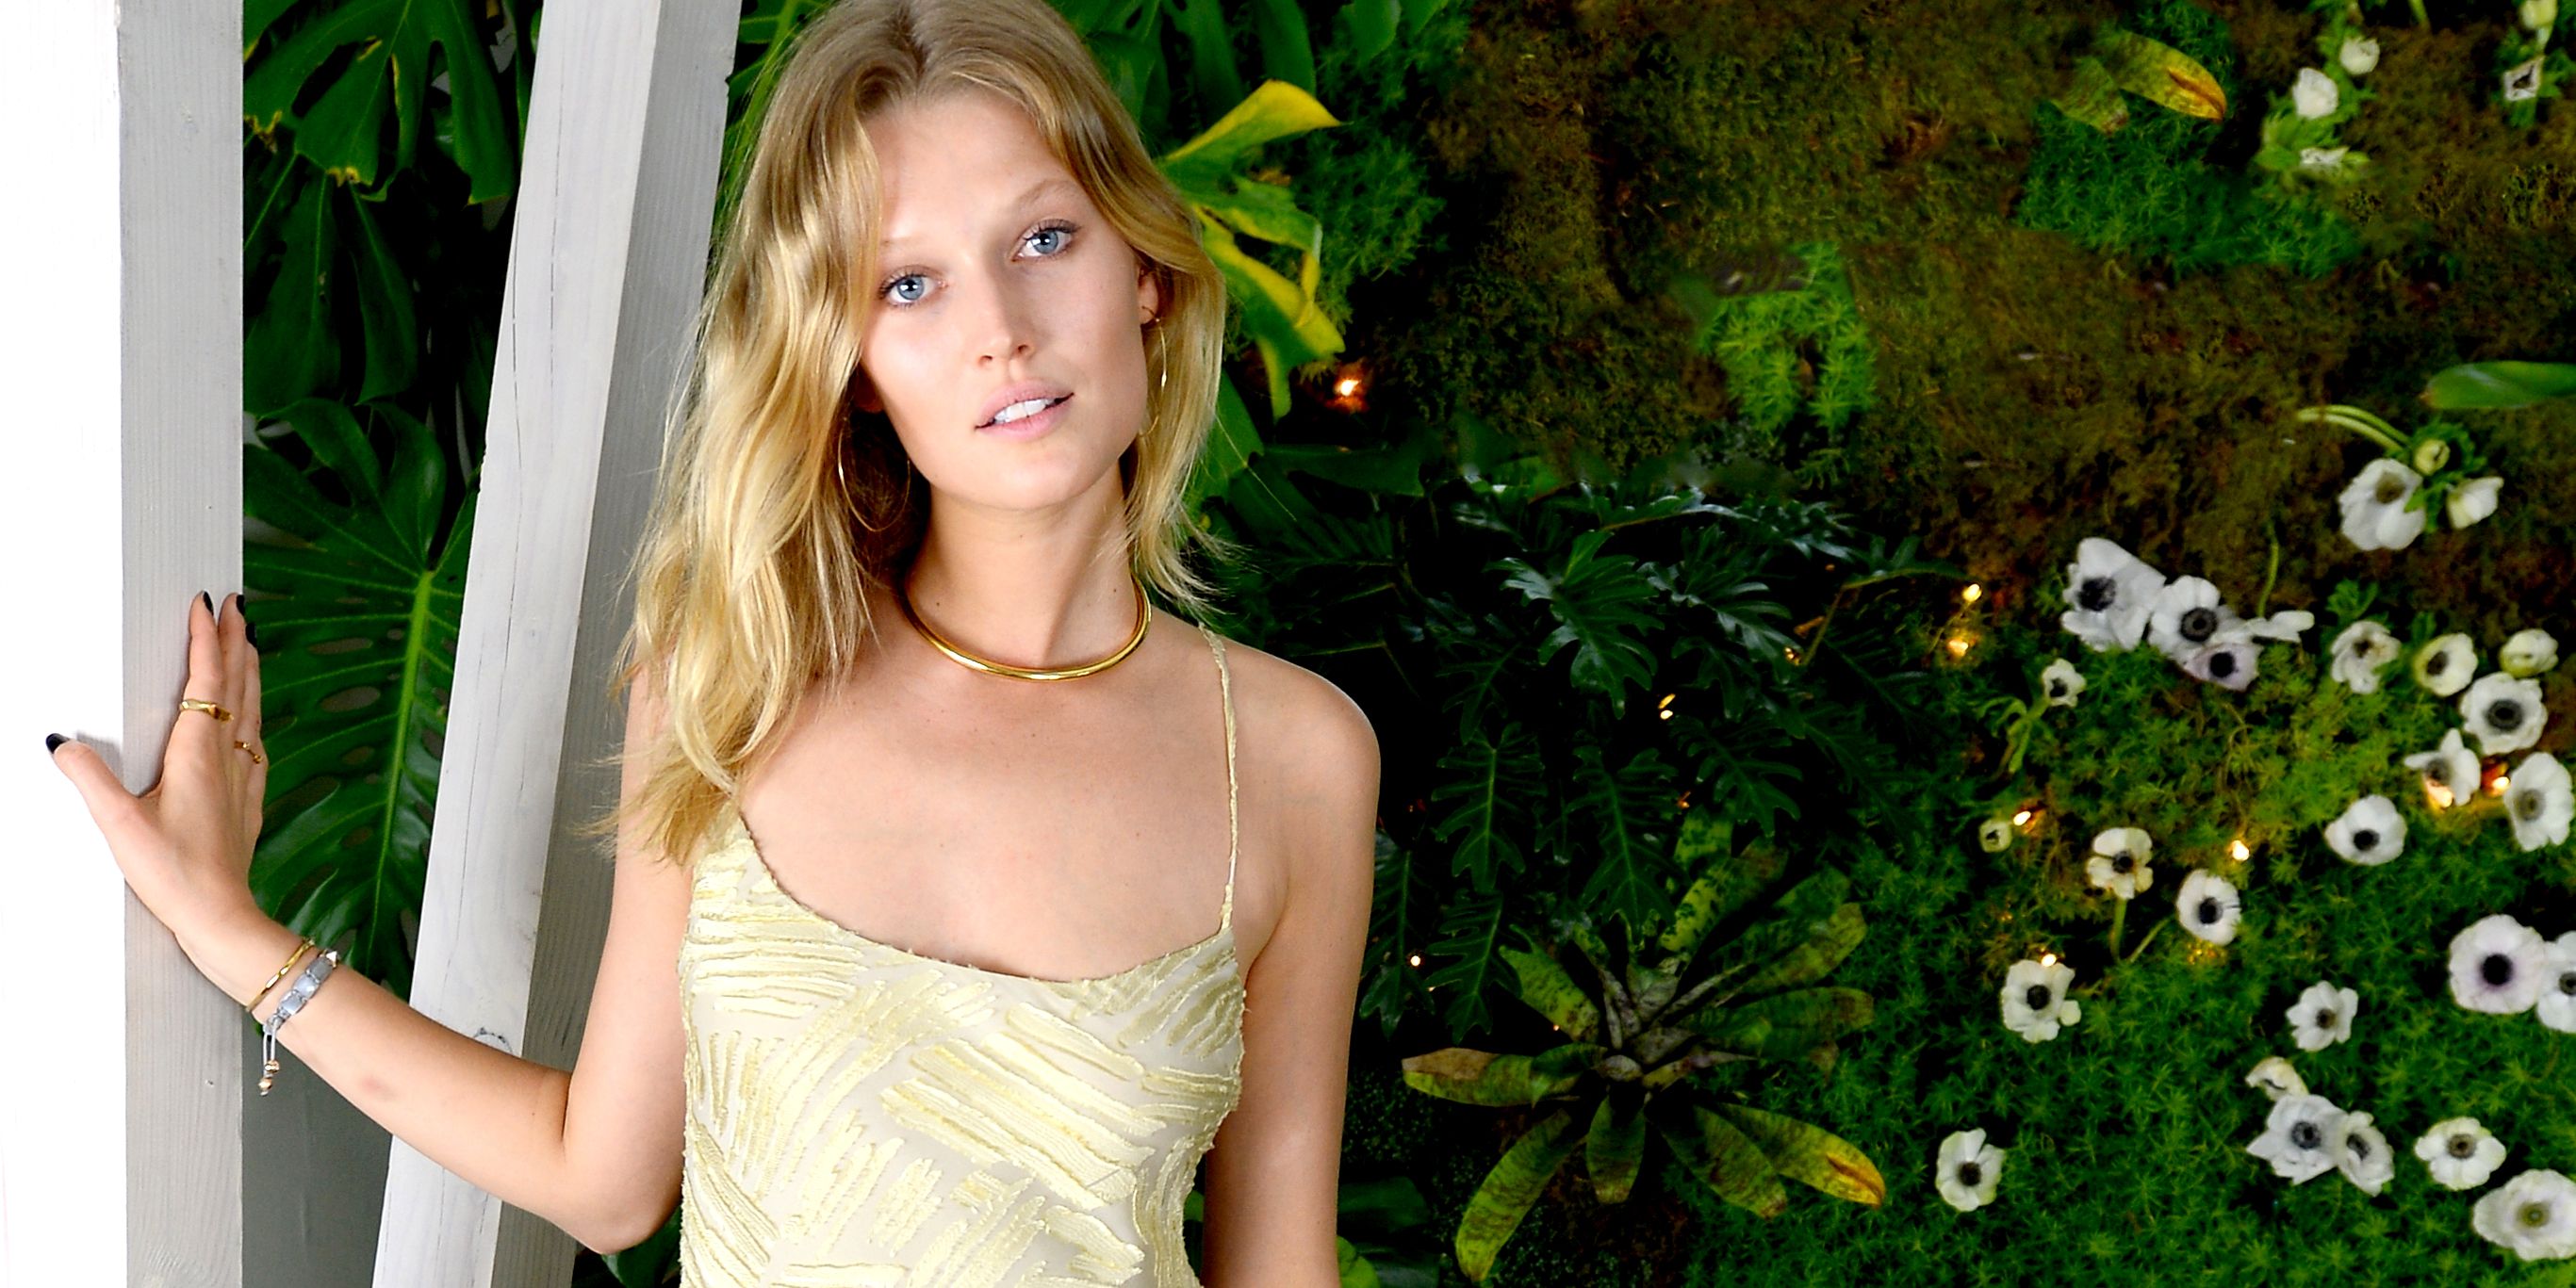 Toni Garrn Weighs In On Why Models Should Stay In School